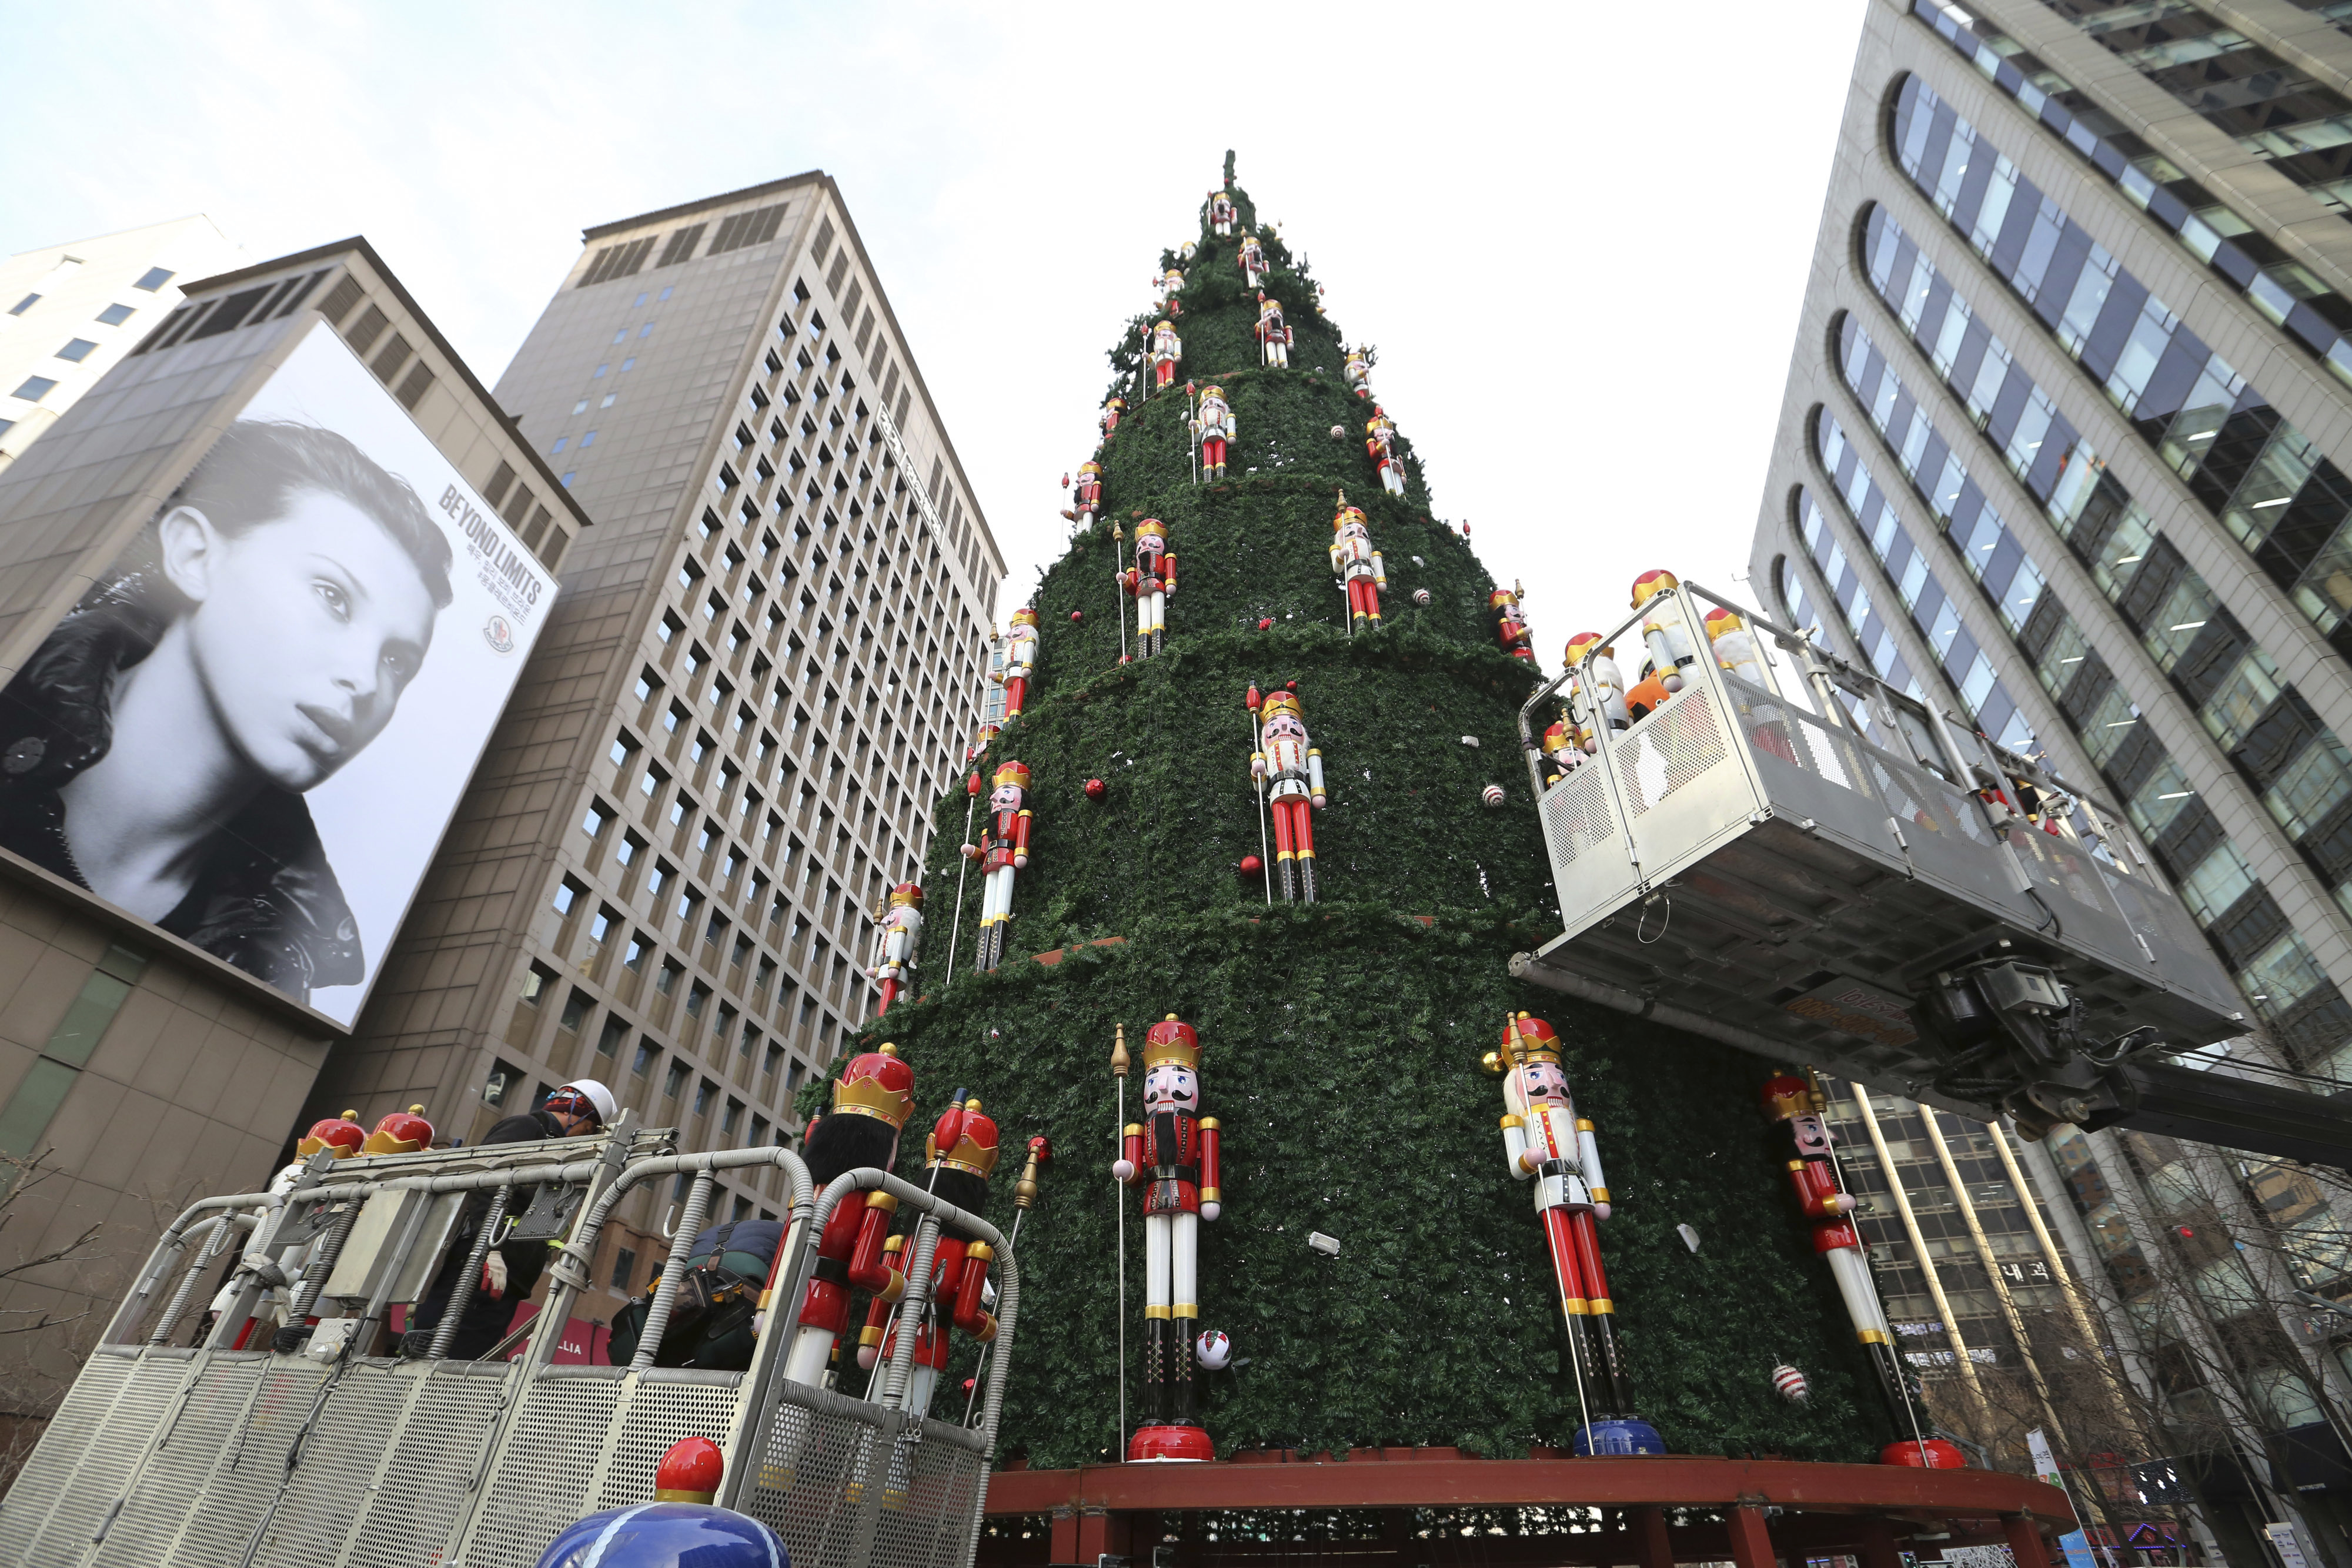 Workers place dolls to decorate a huge Christmas tree in Seoul, South Korea, Thursday, Dec. 6, 2018. Christmas is one of the biggest holidays celebrated in South Korea with some one third of the population being Christians. (AP Photo/Ahn Young-joon)